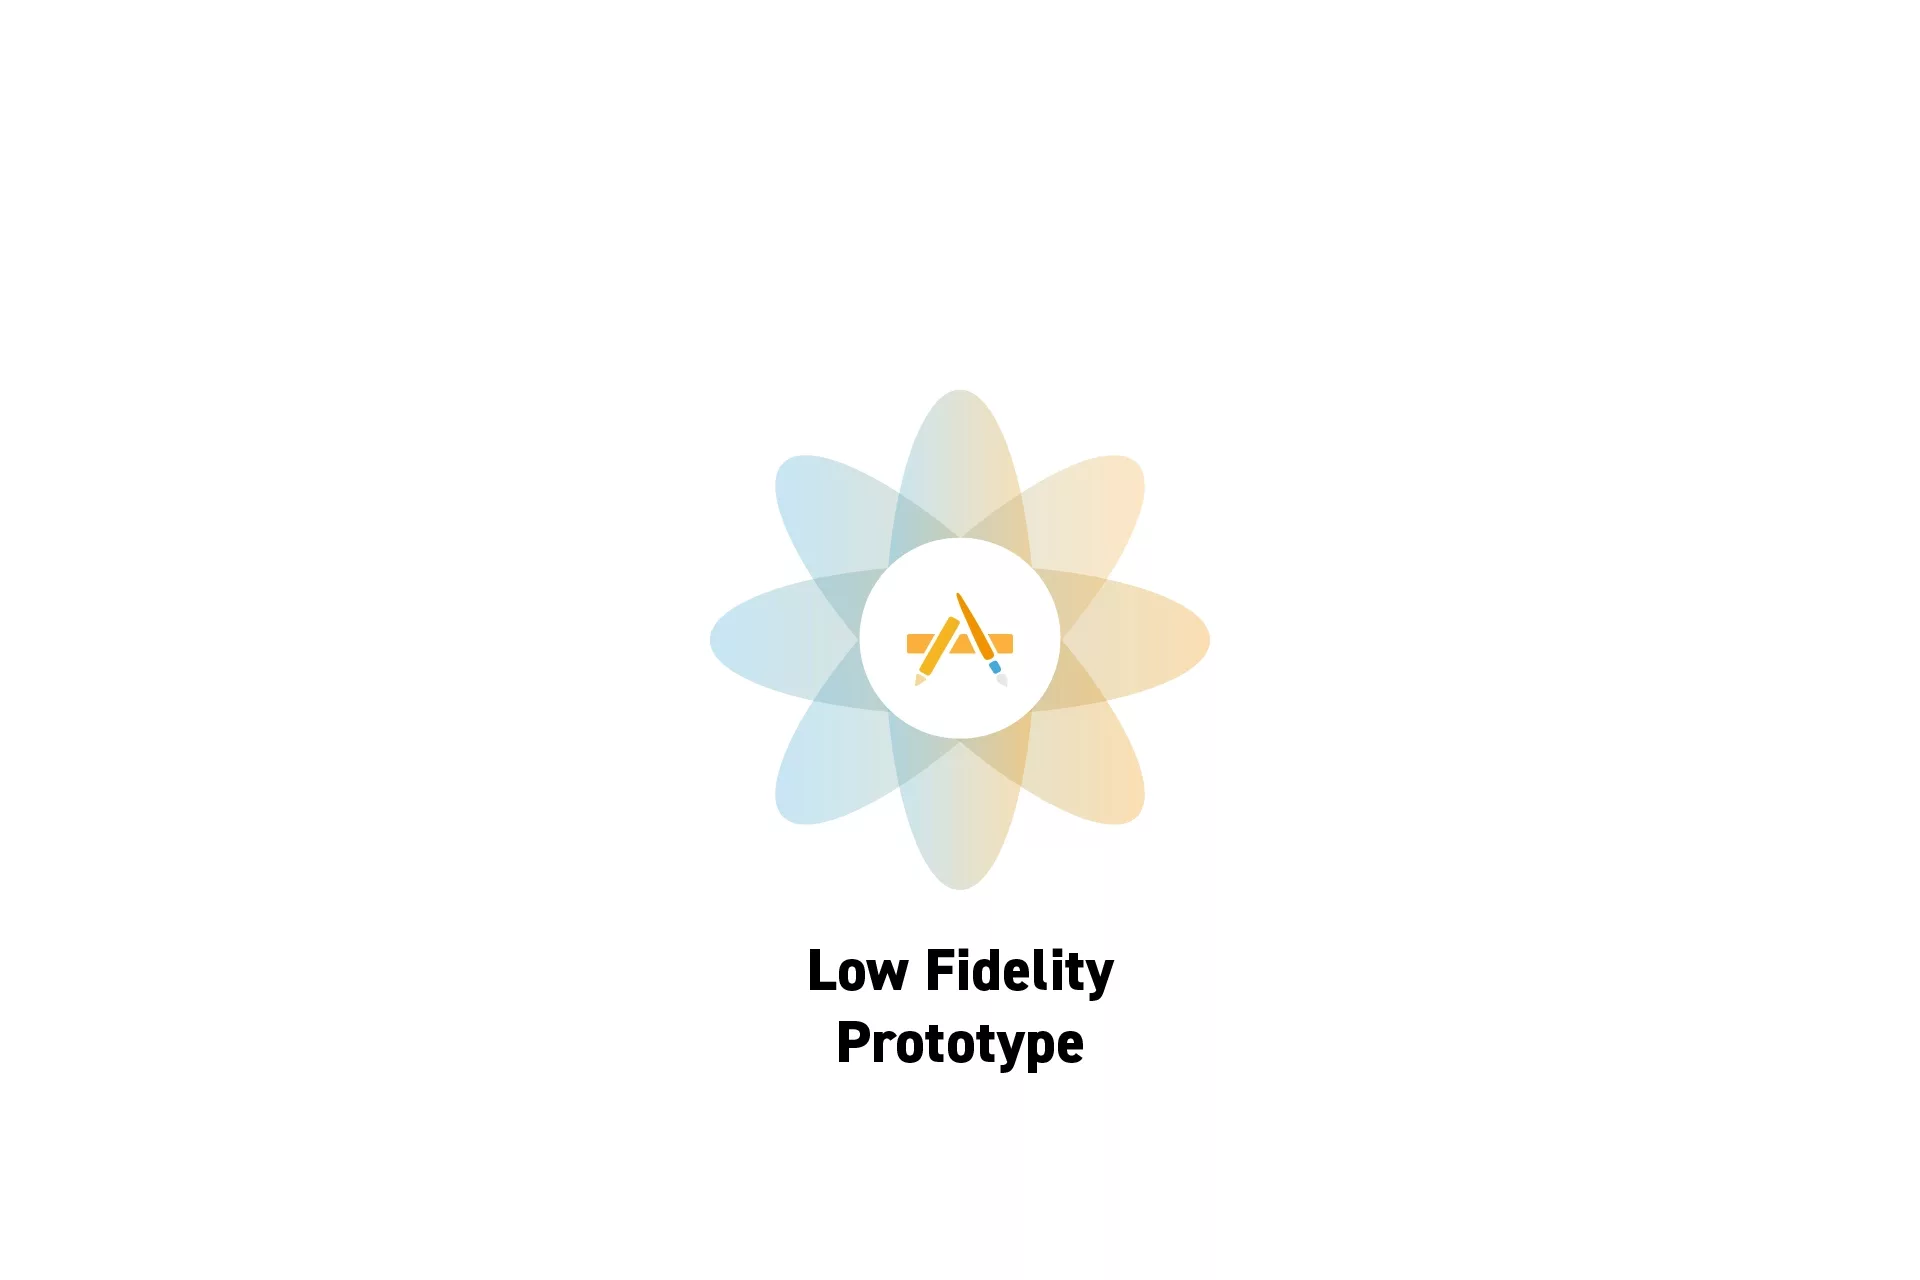 A flower that represents Digital Craft with the text “Low Fidelity Prototype” beneath it.